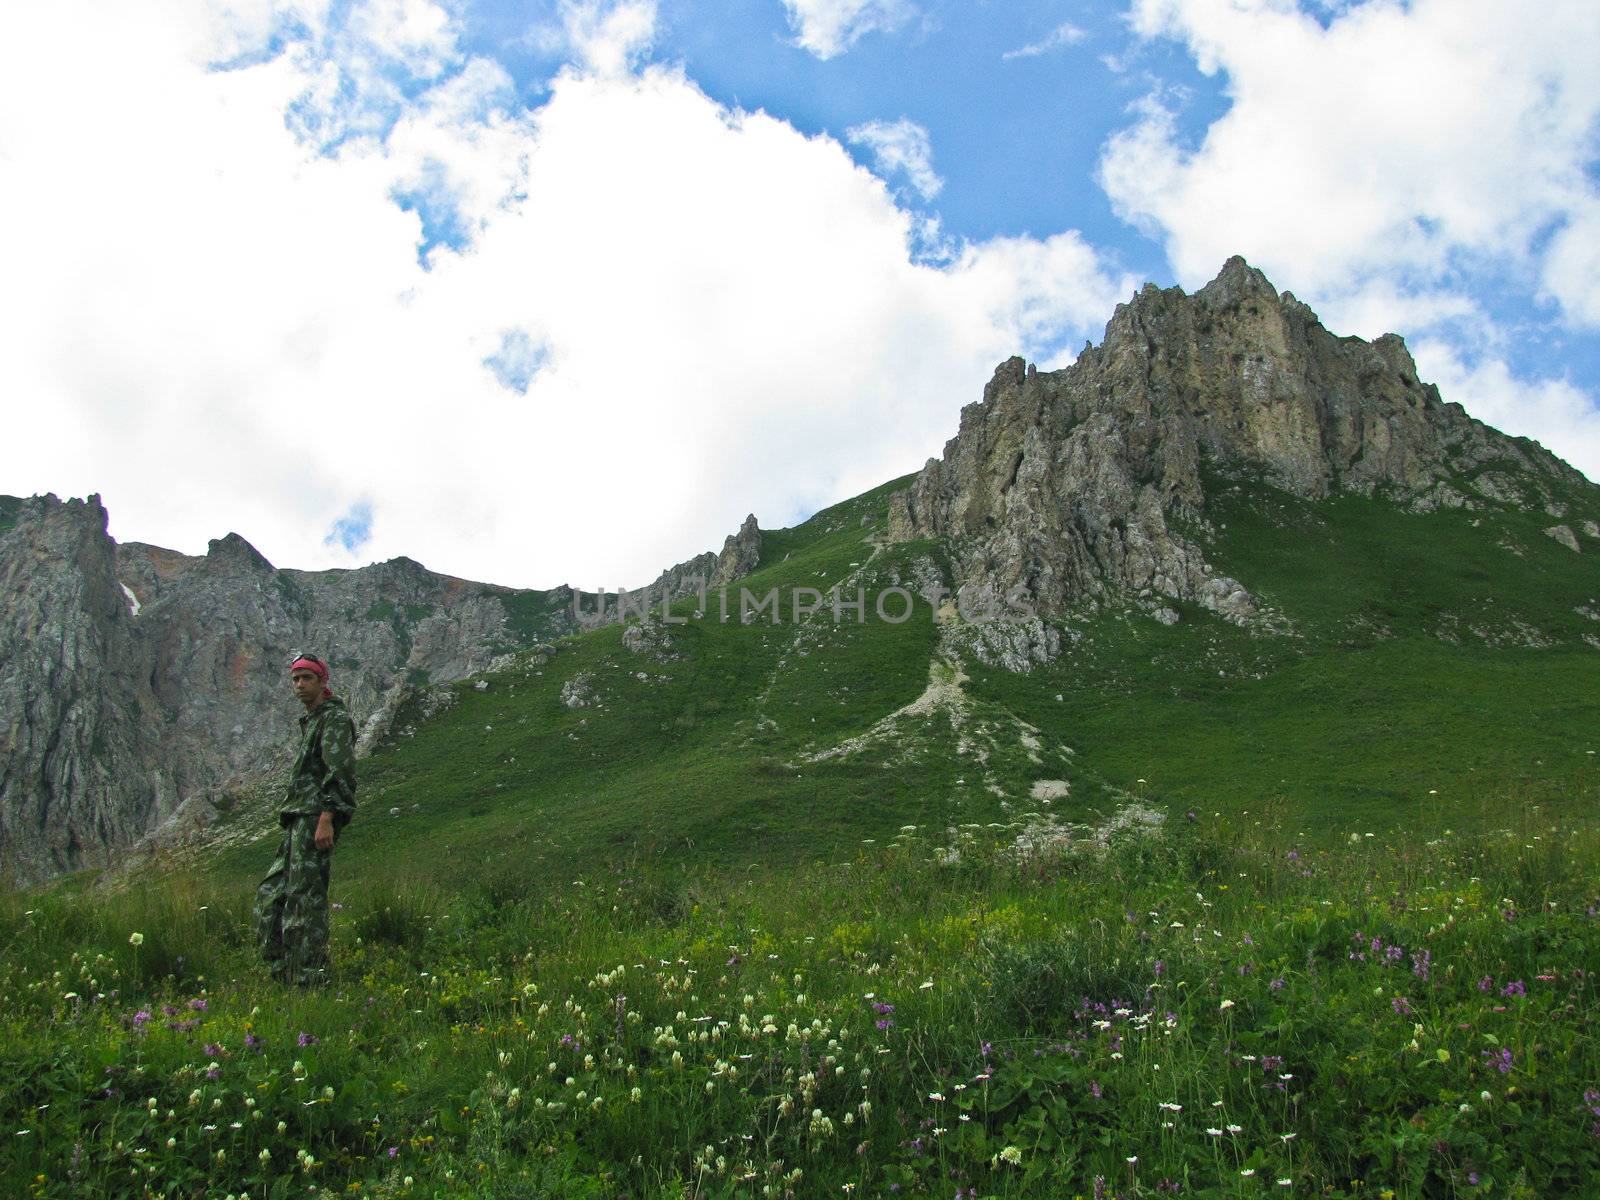 The magnificent mountain scenery of the Caucasus Nature Reserve by Viktoha